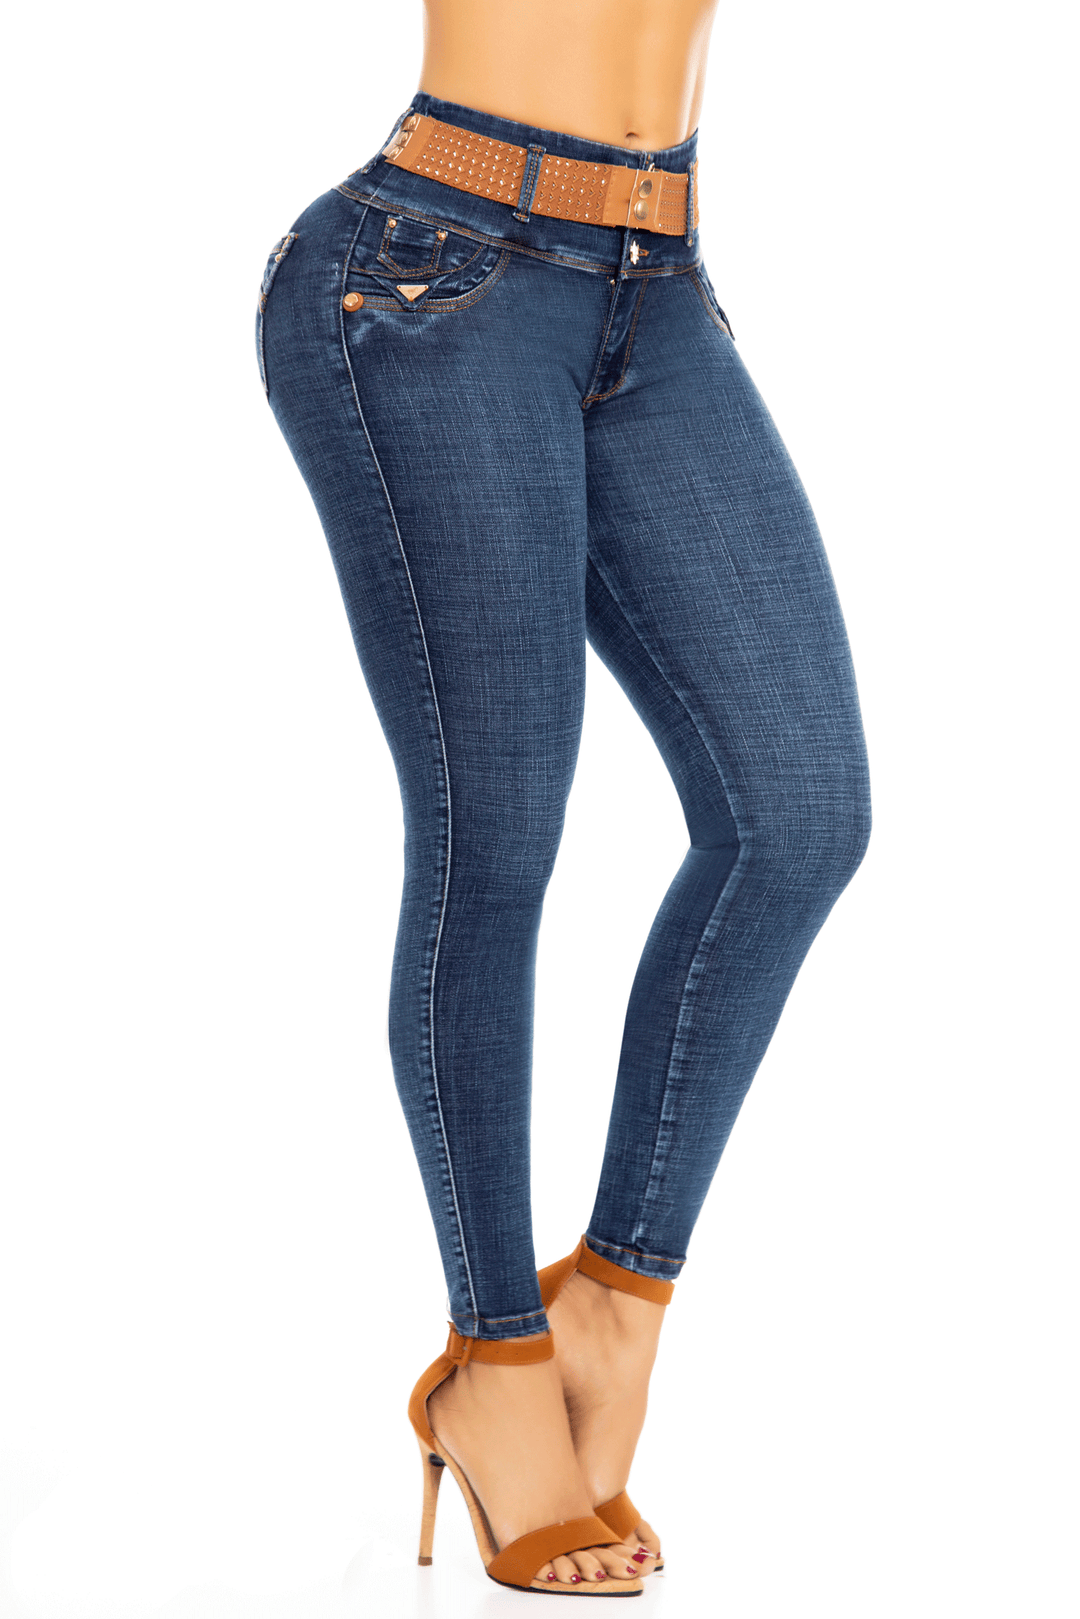 Ripley - JEANS COLOMBIANO LEVANTA COLA 21272 REAL JEANS